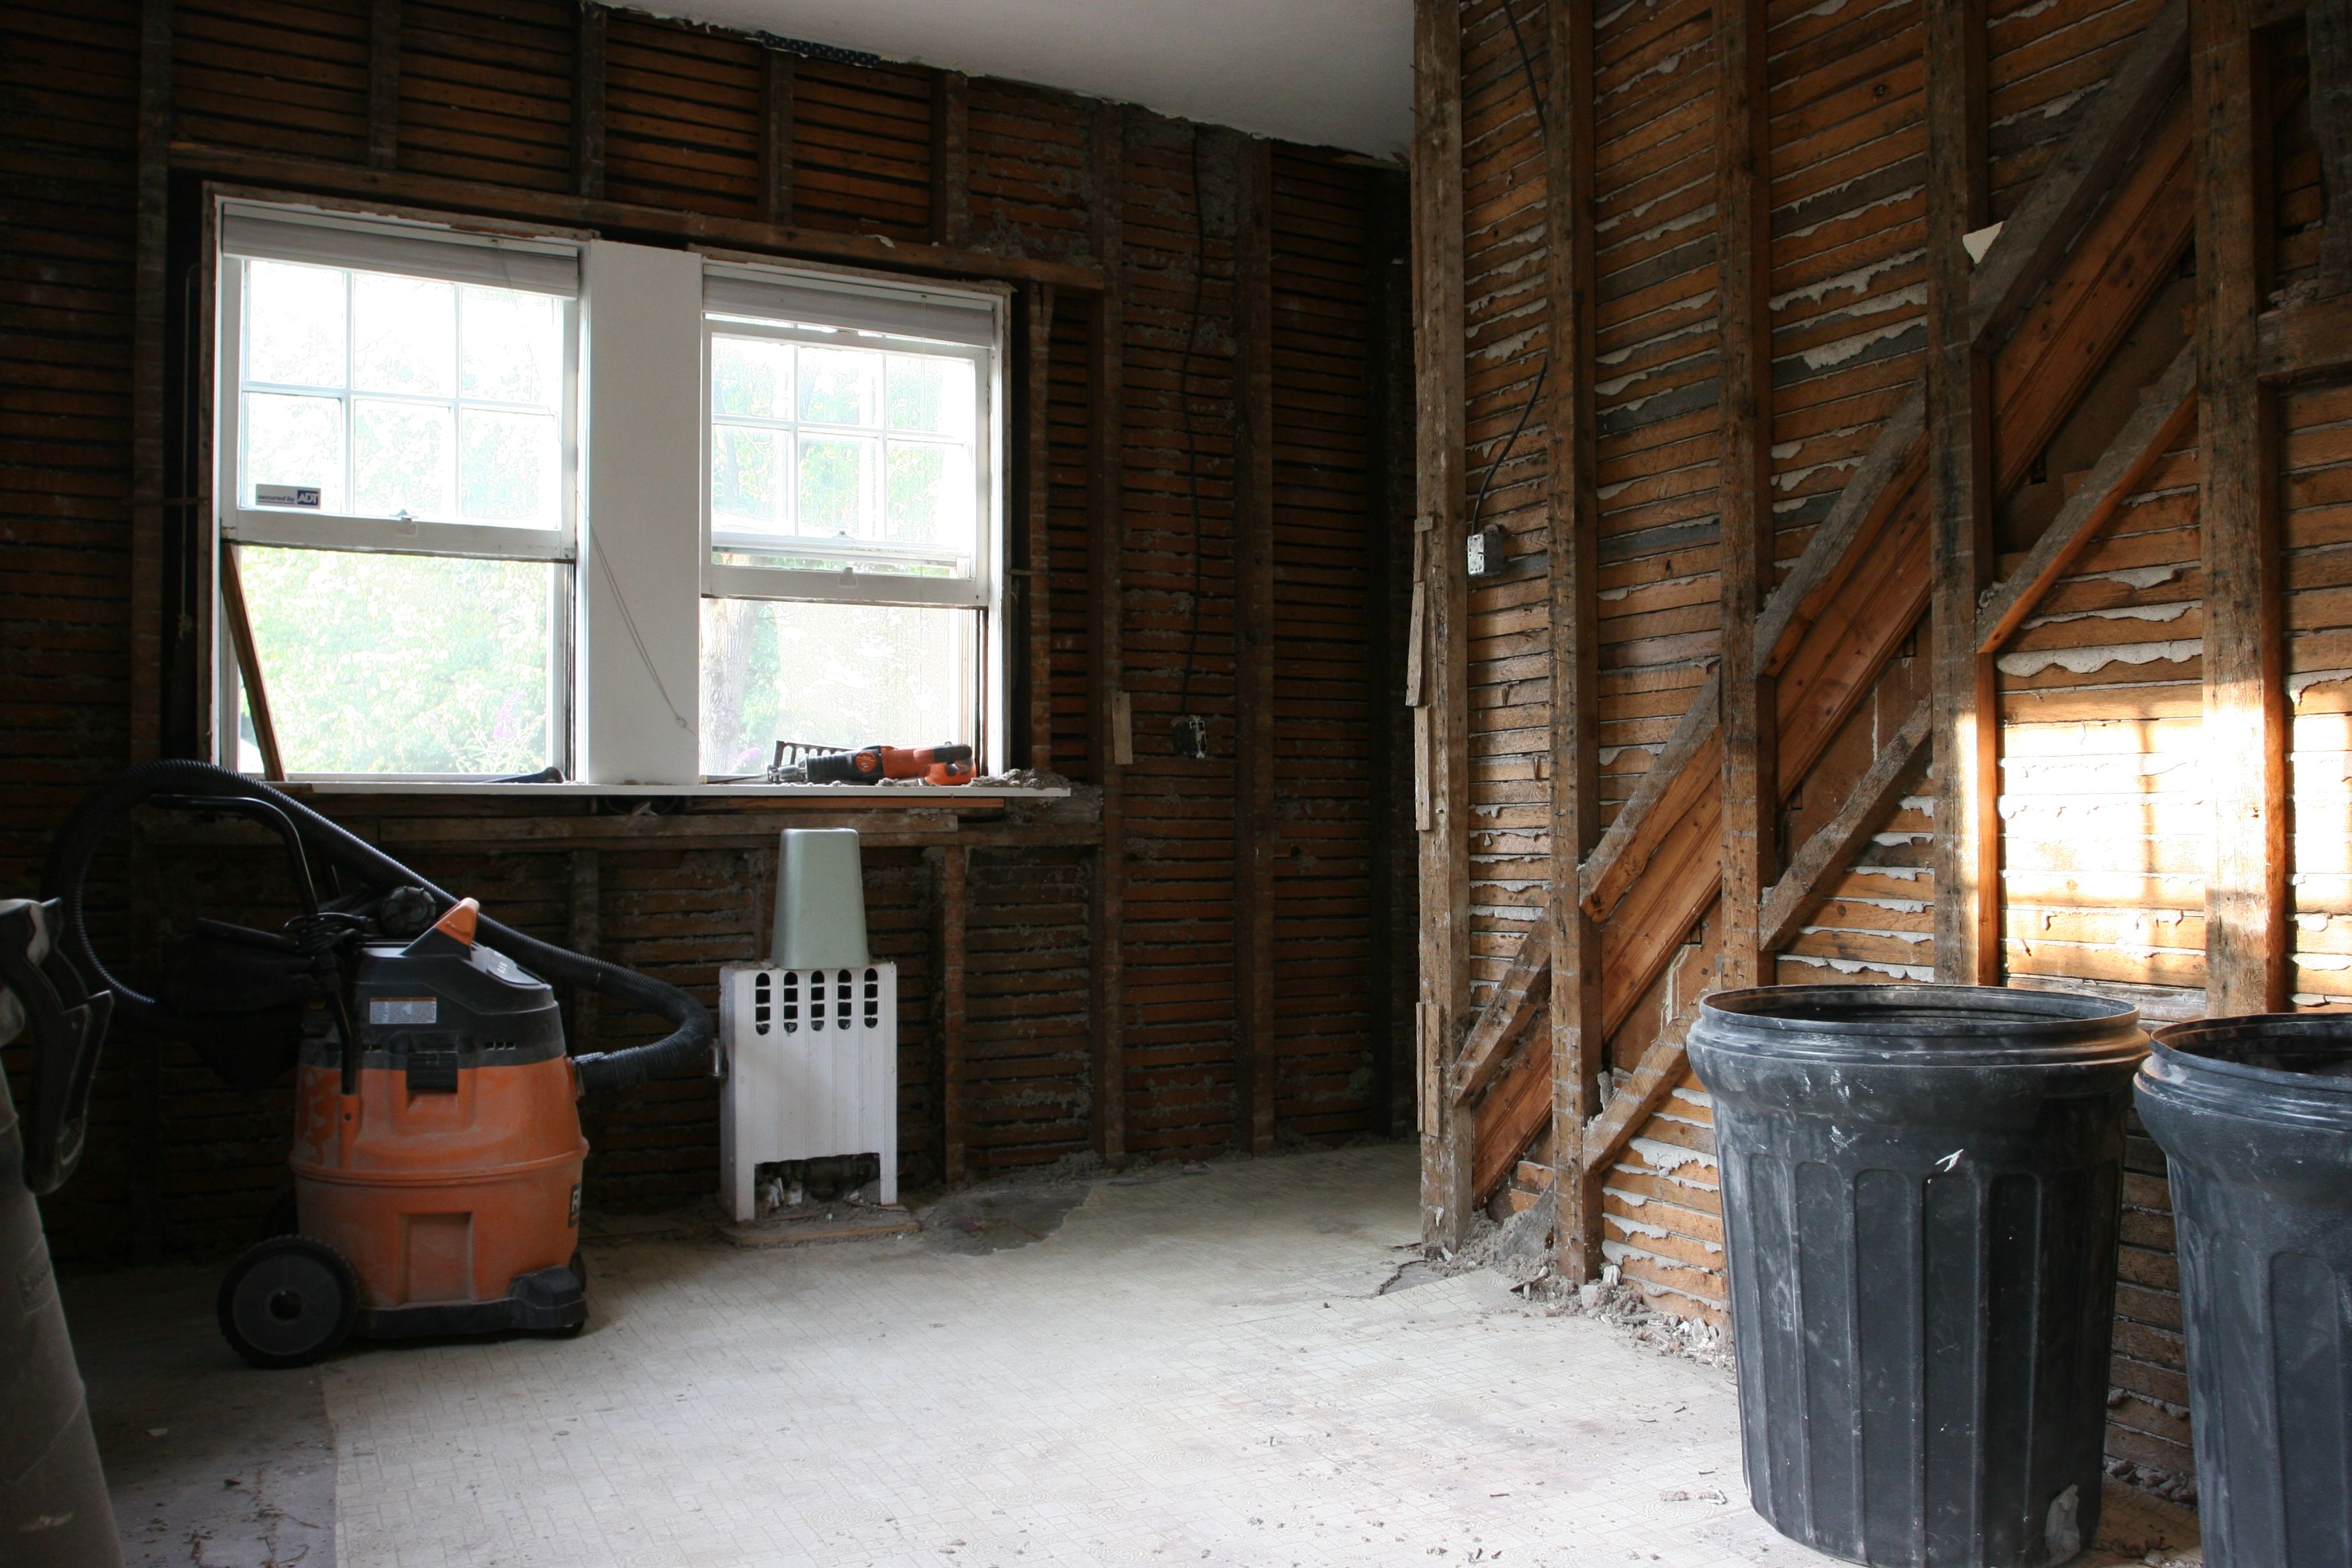 Front of kitchen, future home of a breakfast bar, and pantry at foot of maid's staircase.